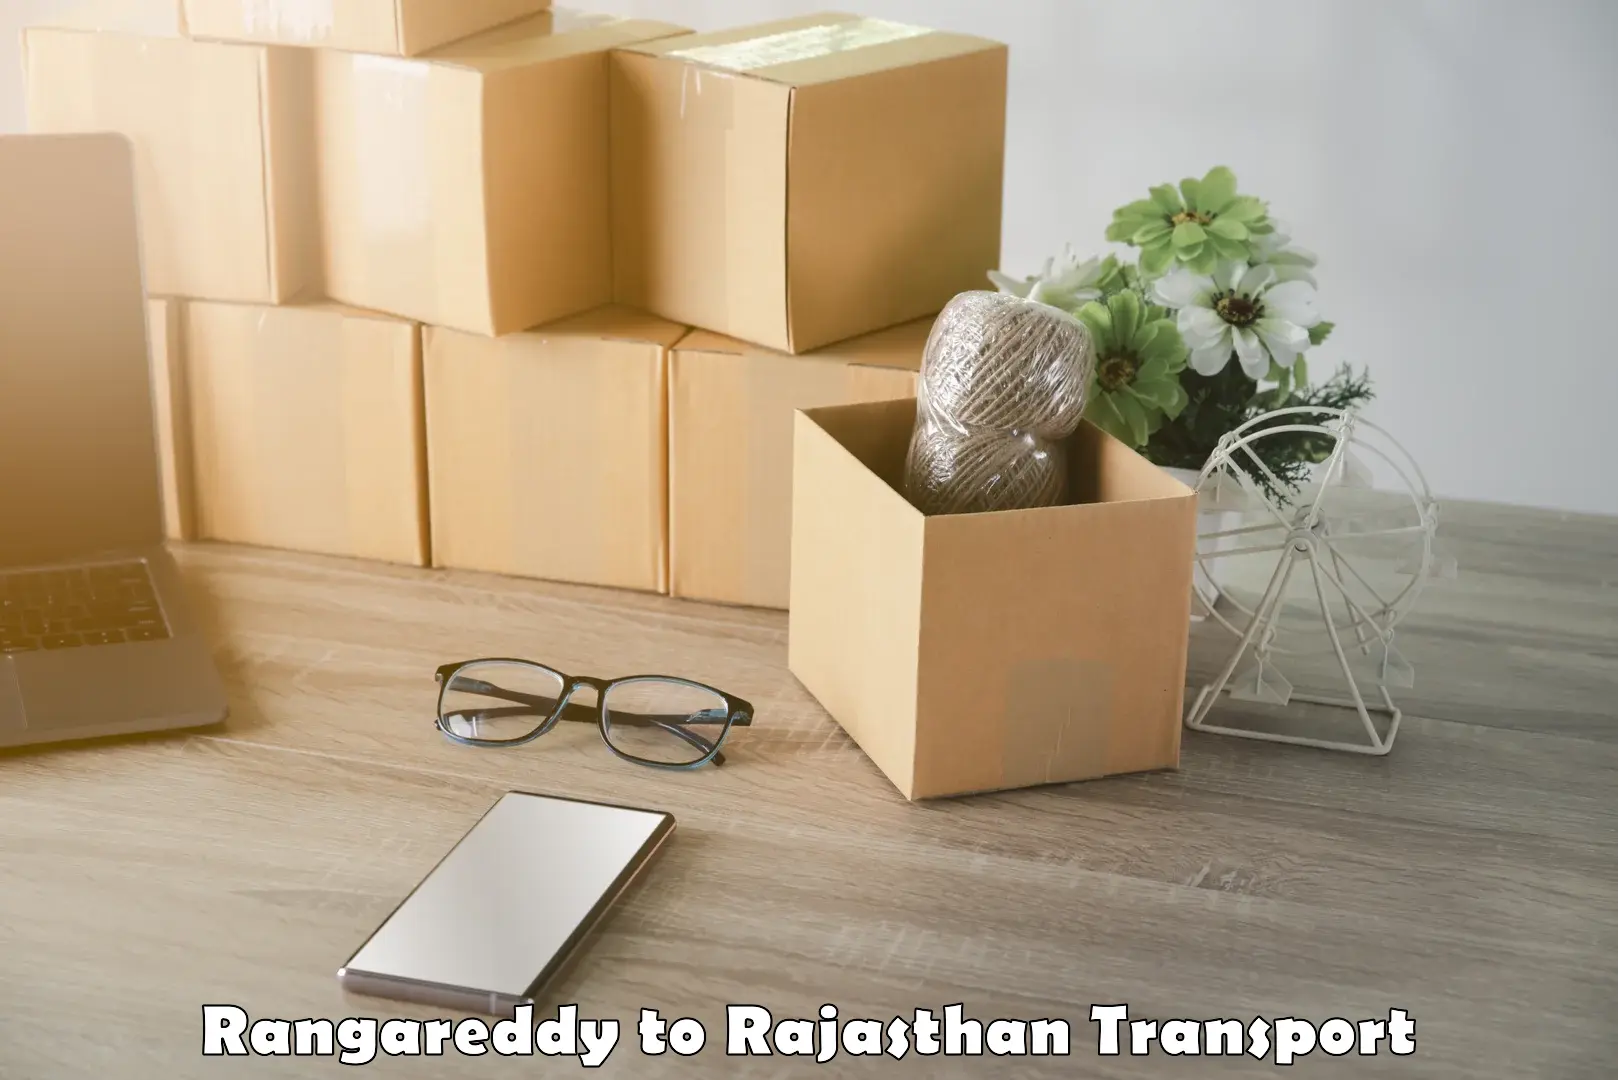 Nearby transport service Rangareddy to Yeswanthapur